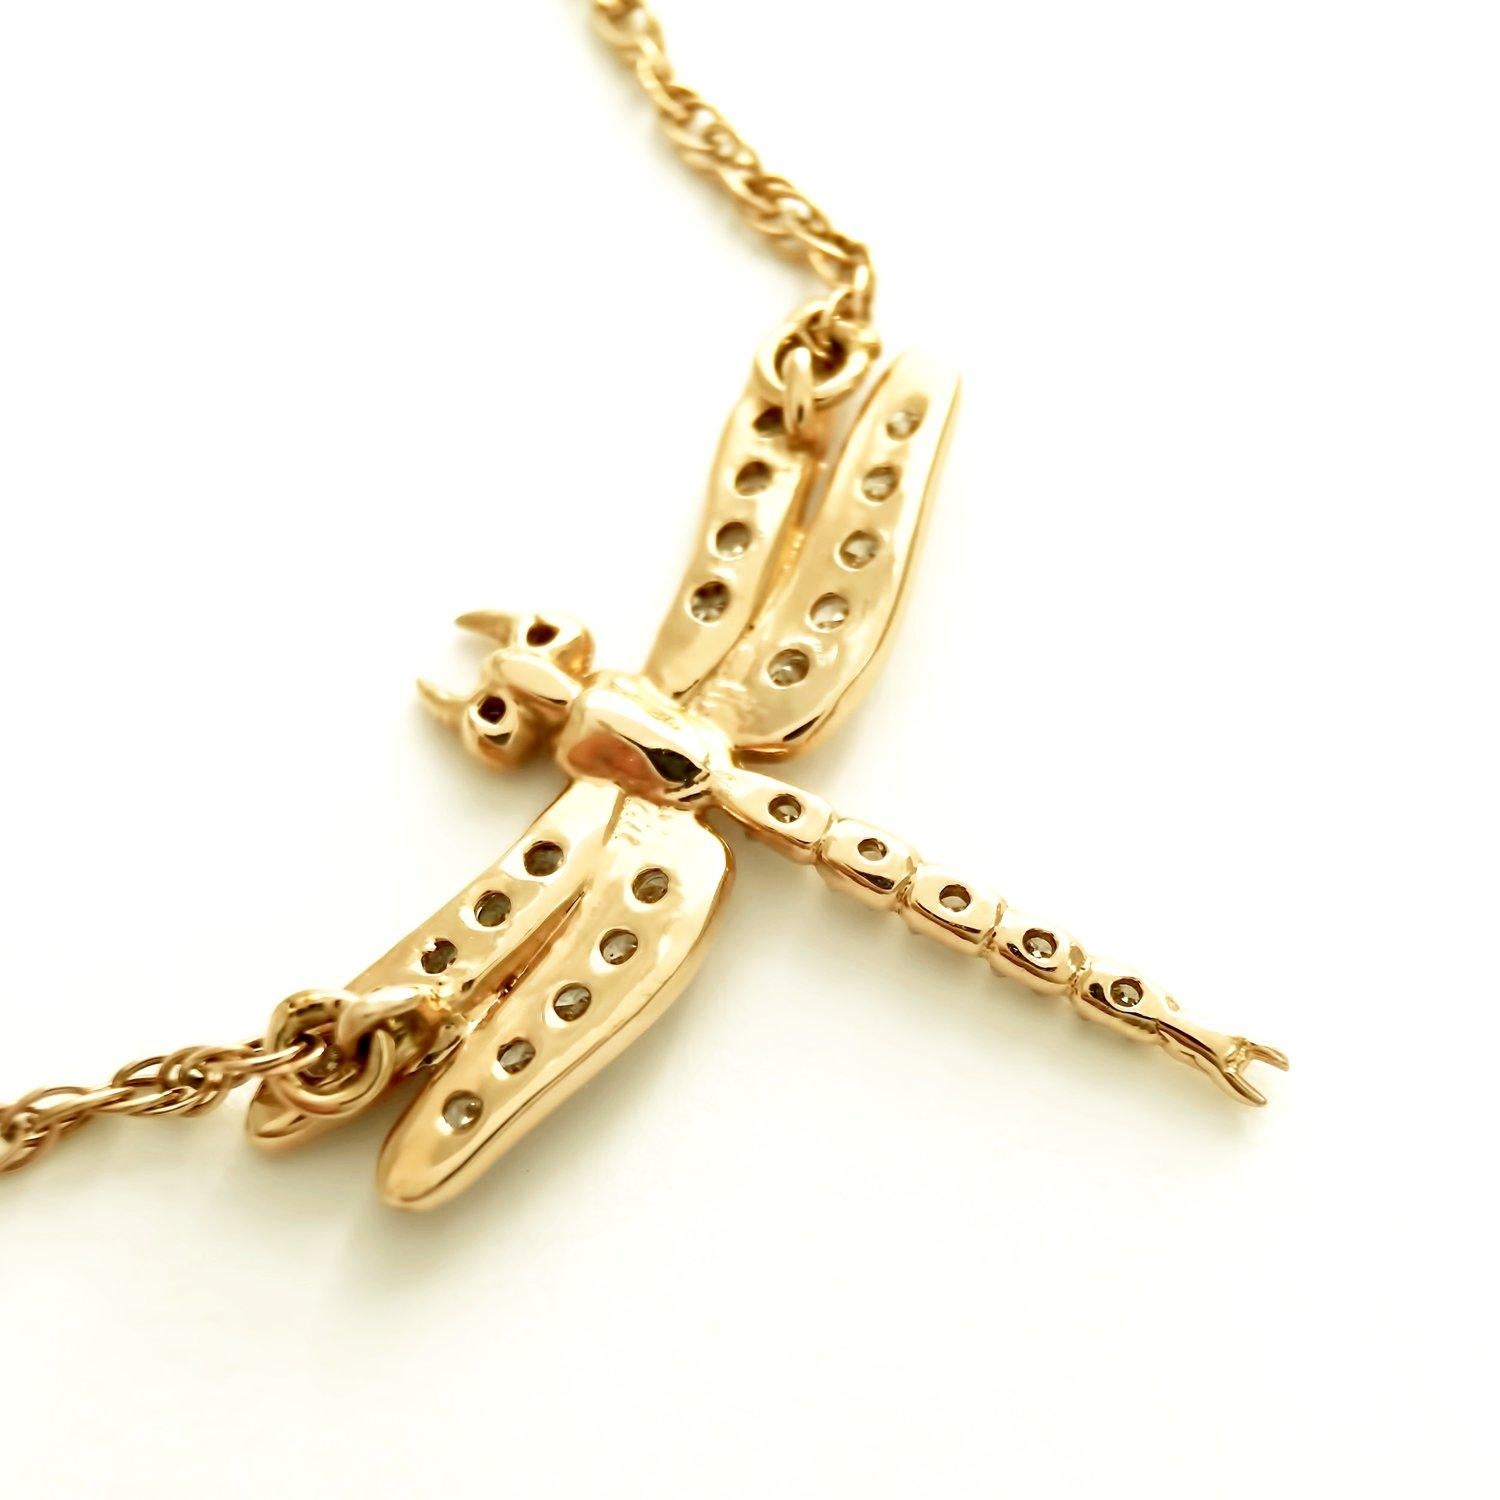 Elevate your style with our Small Dragonfly Diamond Necklace in Yellow Gold. Inspired by the mesmerizing beauty and adaptability of dragonflies, this piece captures the essence of these ethereal creatures.

Intricately designed, this limited edition